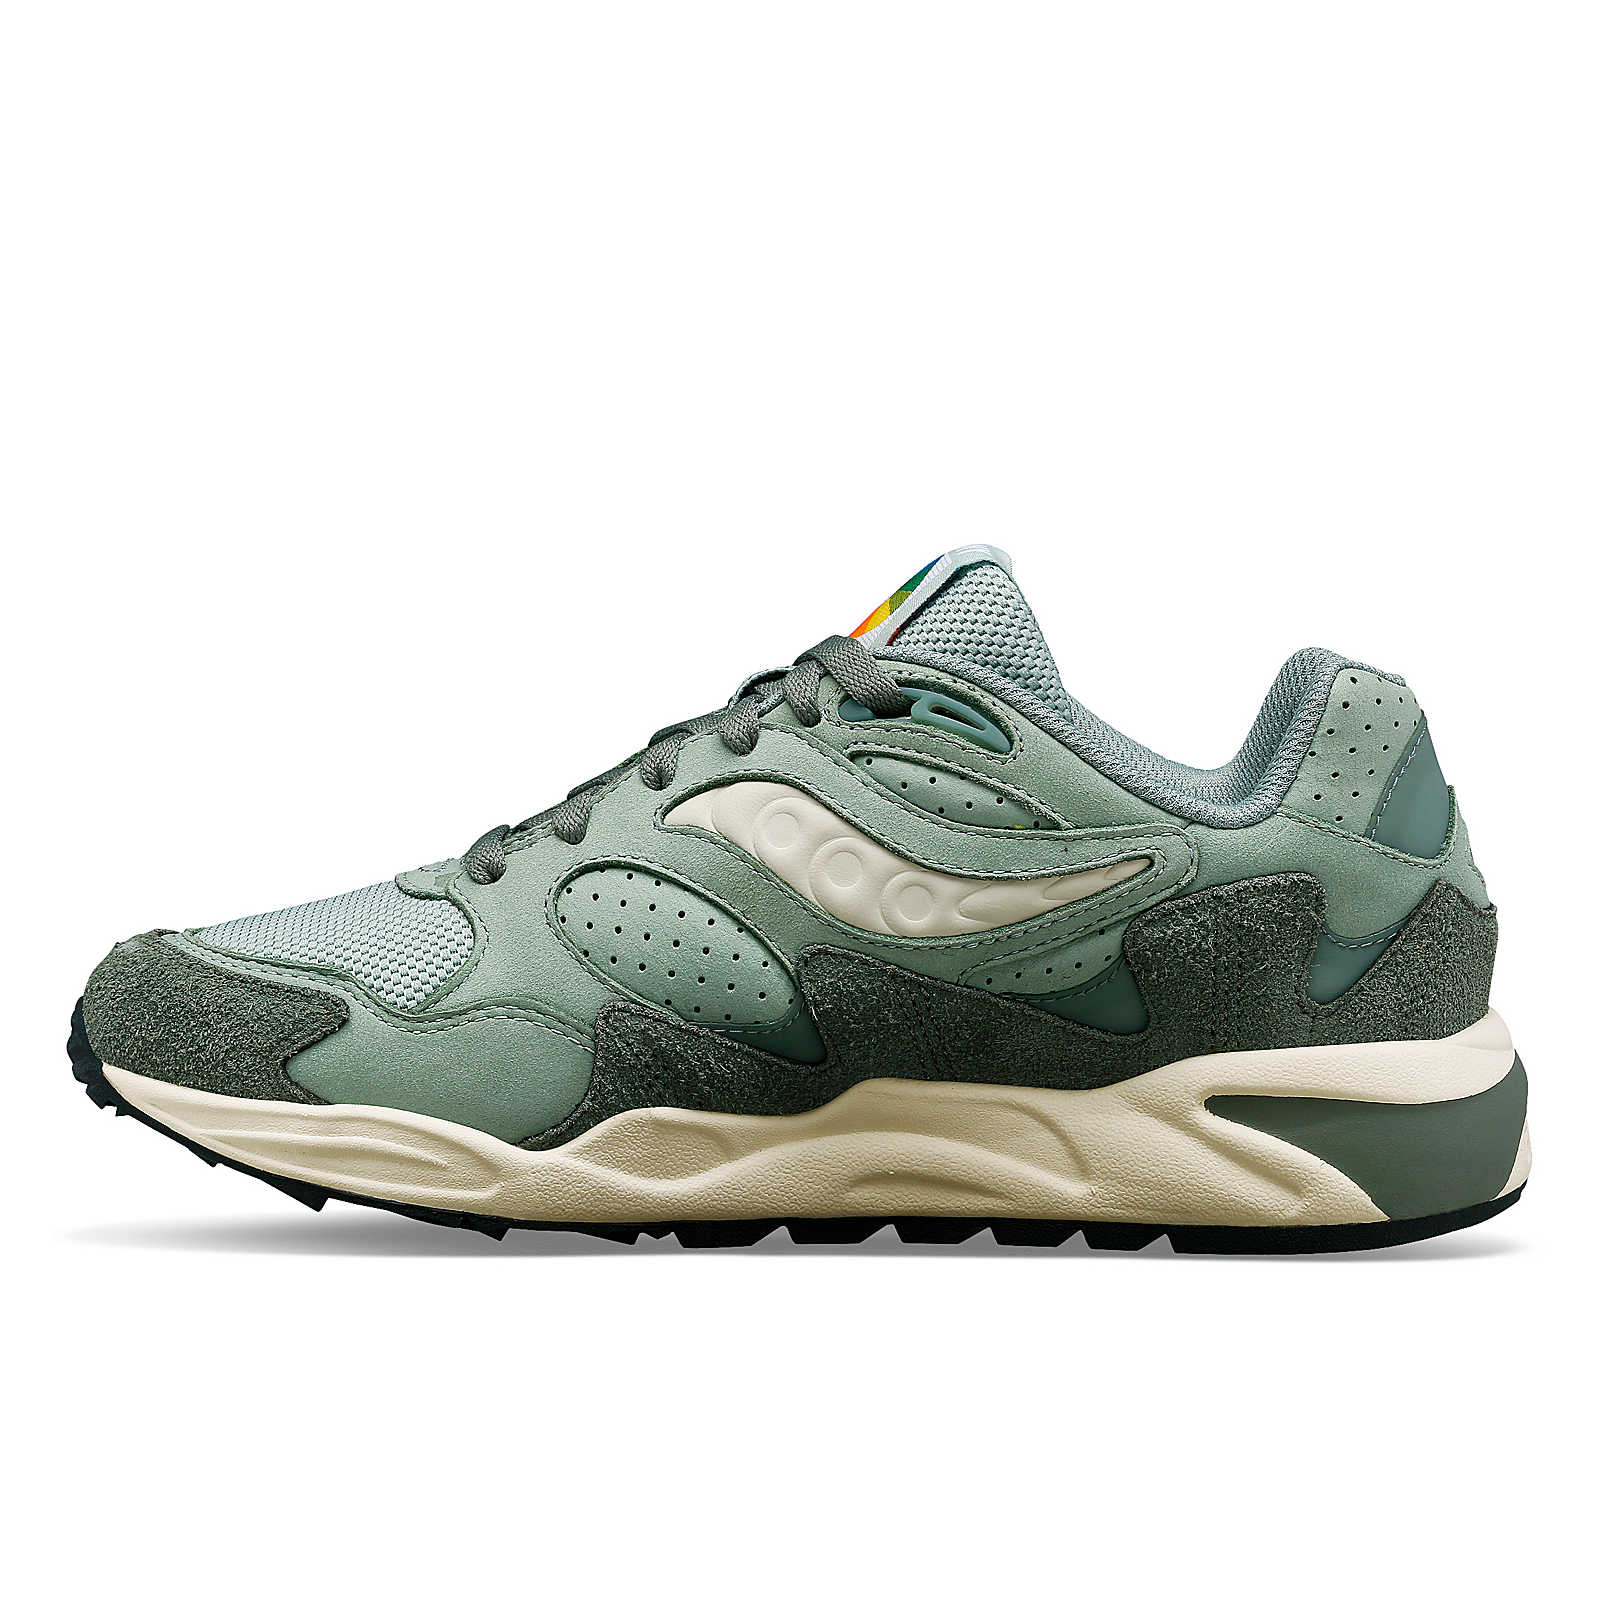 Last month END and s10681-20 Saucony dropped the White Noise Chromatic Sage 2